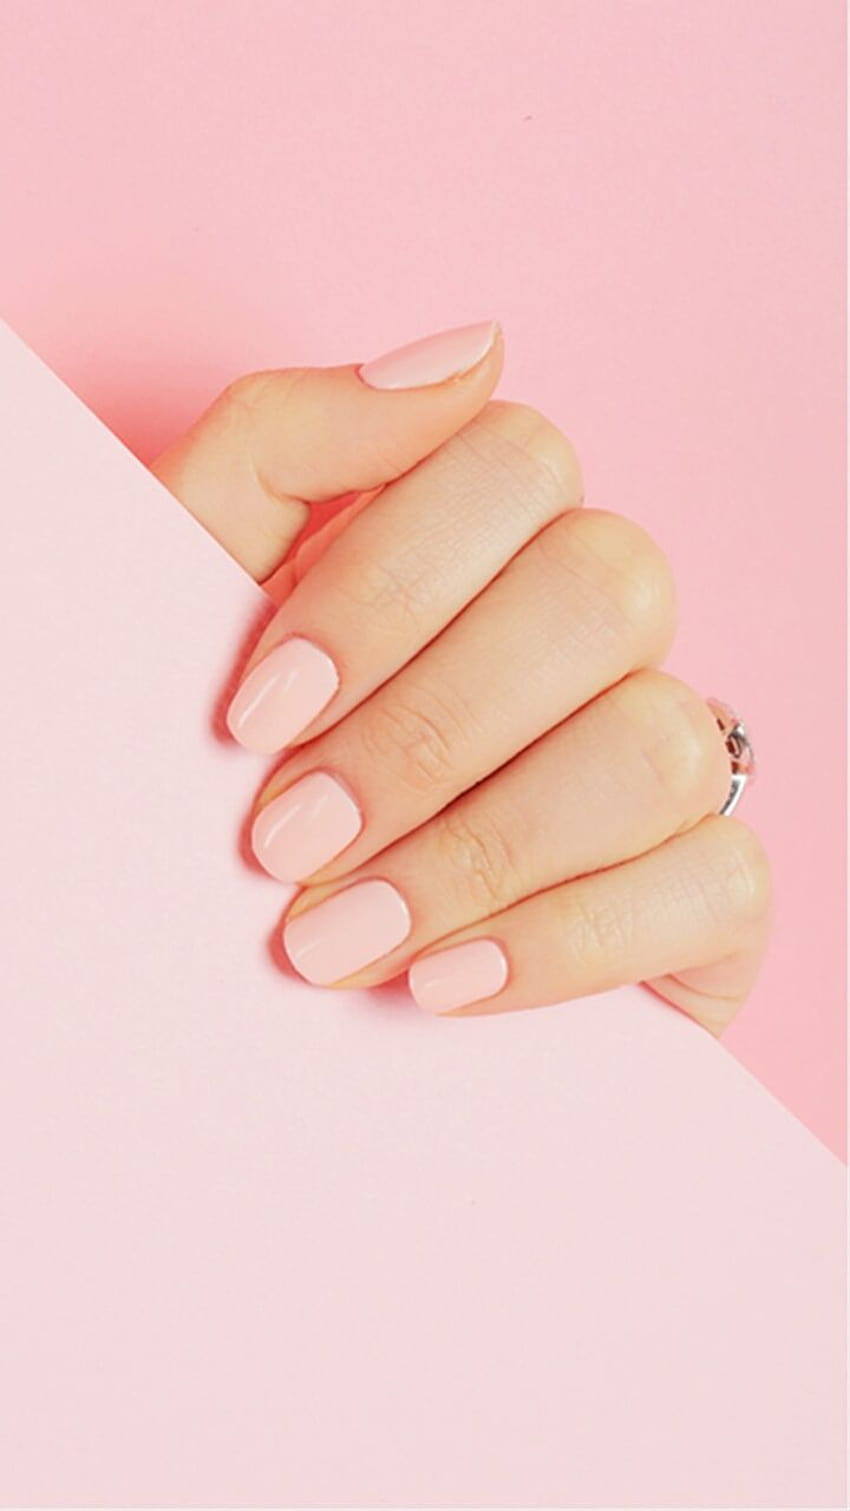 art, background, beautiful, beauty, cosmetic, cosmetics, cutie, decorate, design, fashion, hands, make up, nails, pink, style, we heart it, woman, pink background, art nails, pastel pink, pastel color, beautiful nails, beauty, pink nails HD phone wallpaper